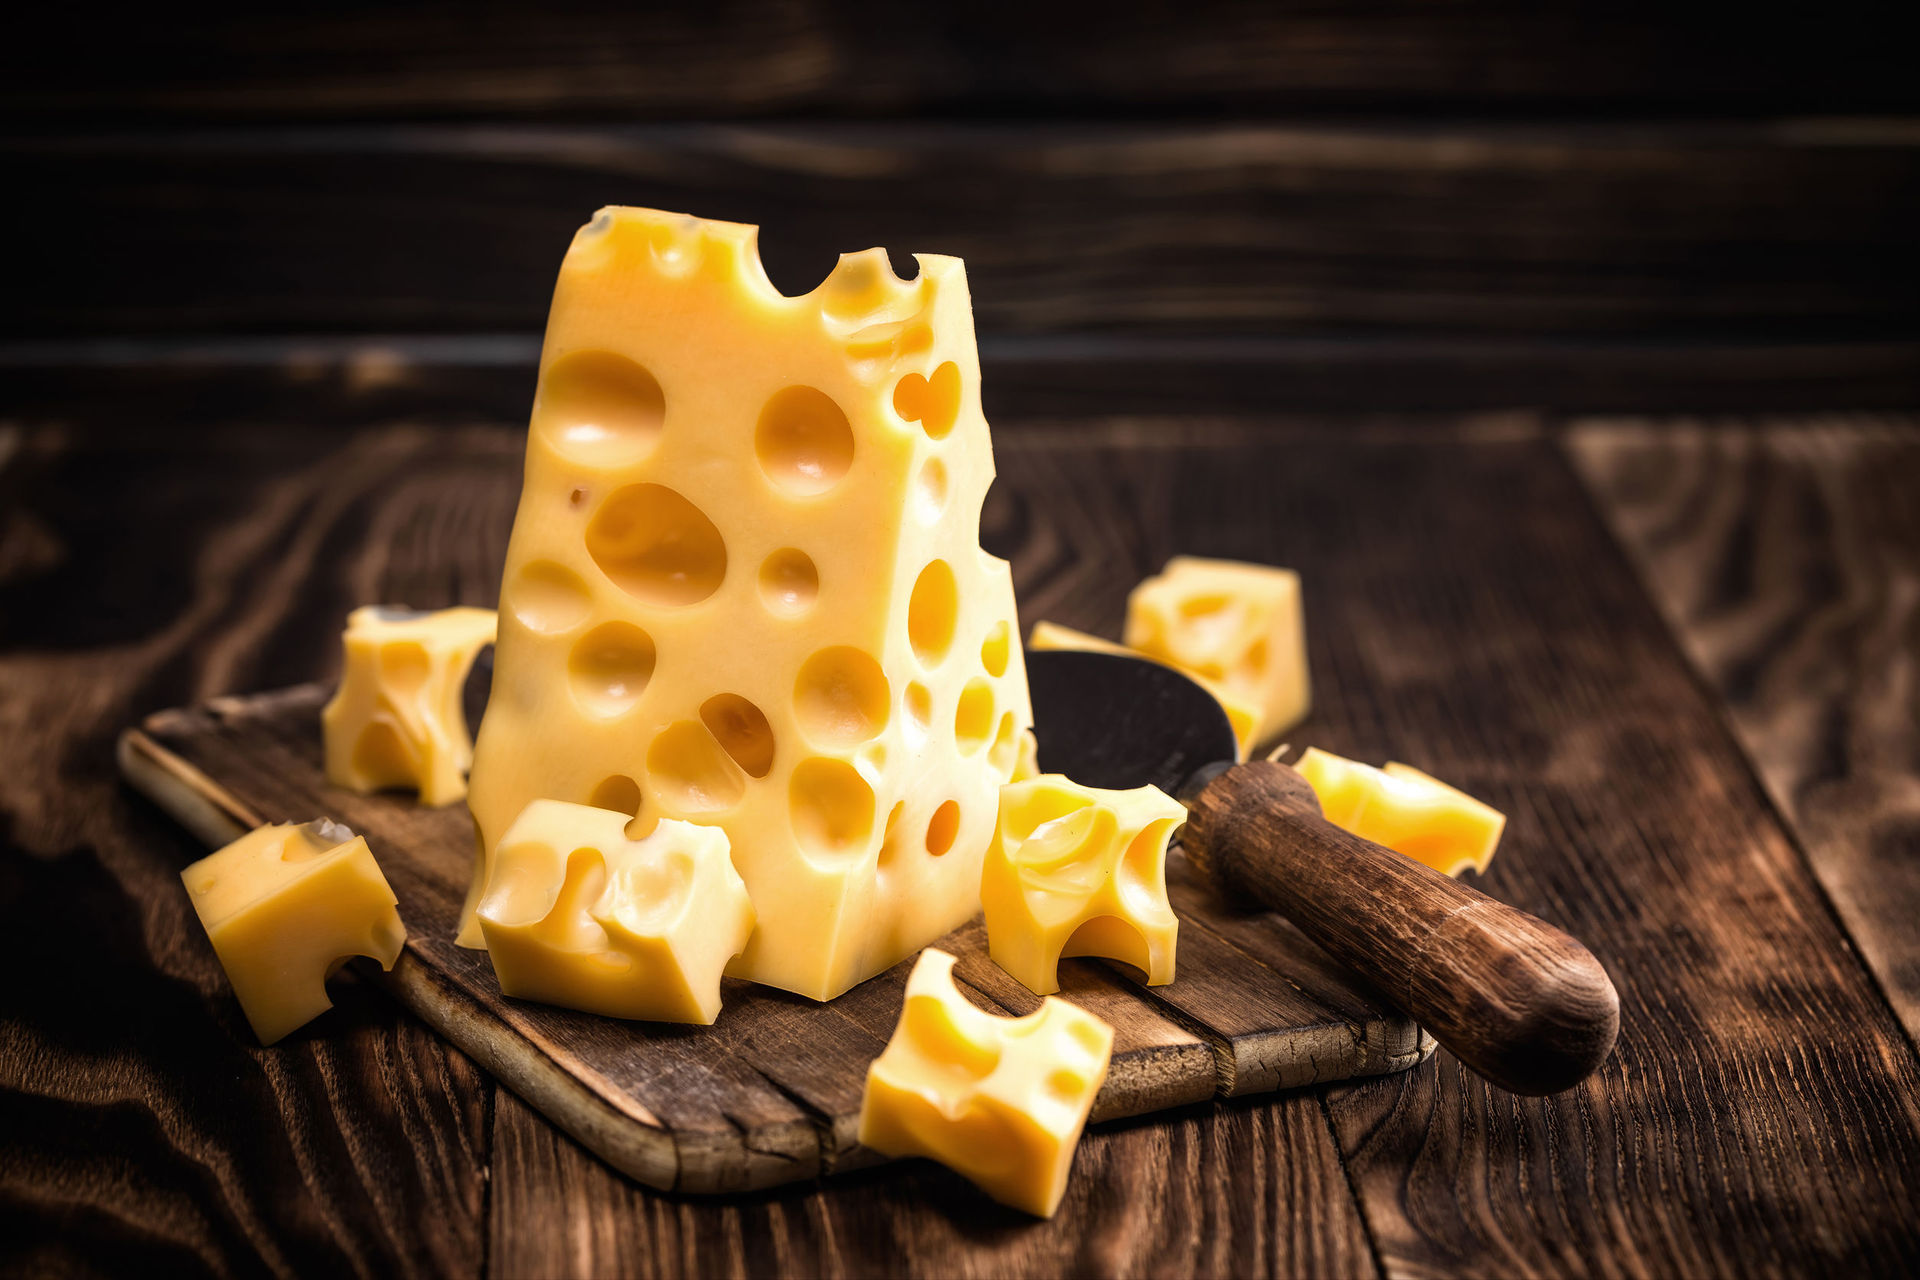 Why Does Swiss Cheese Have Holes?